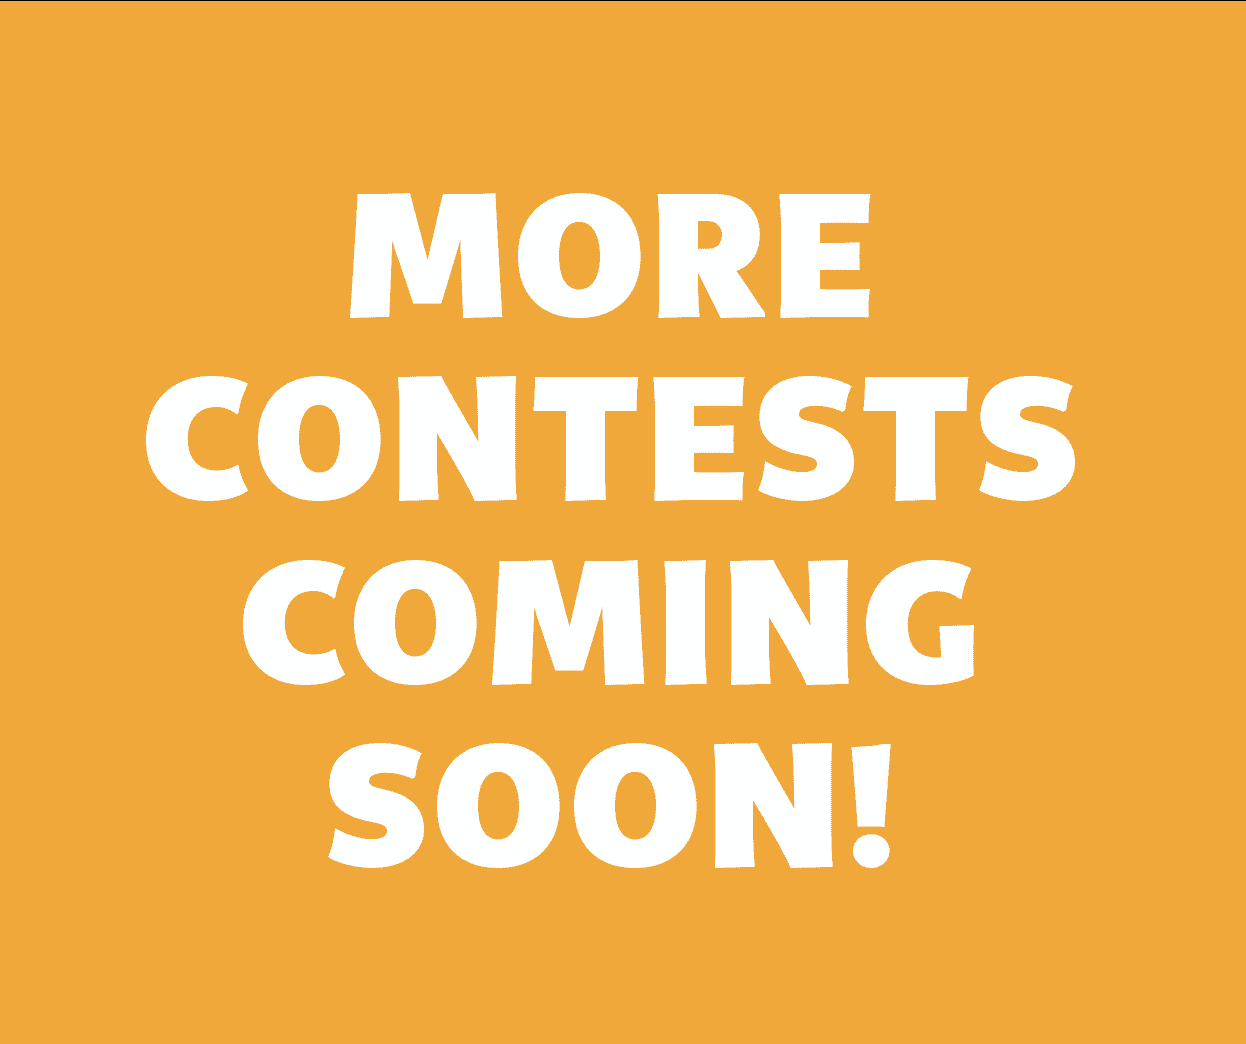 More contests coming soon